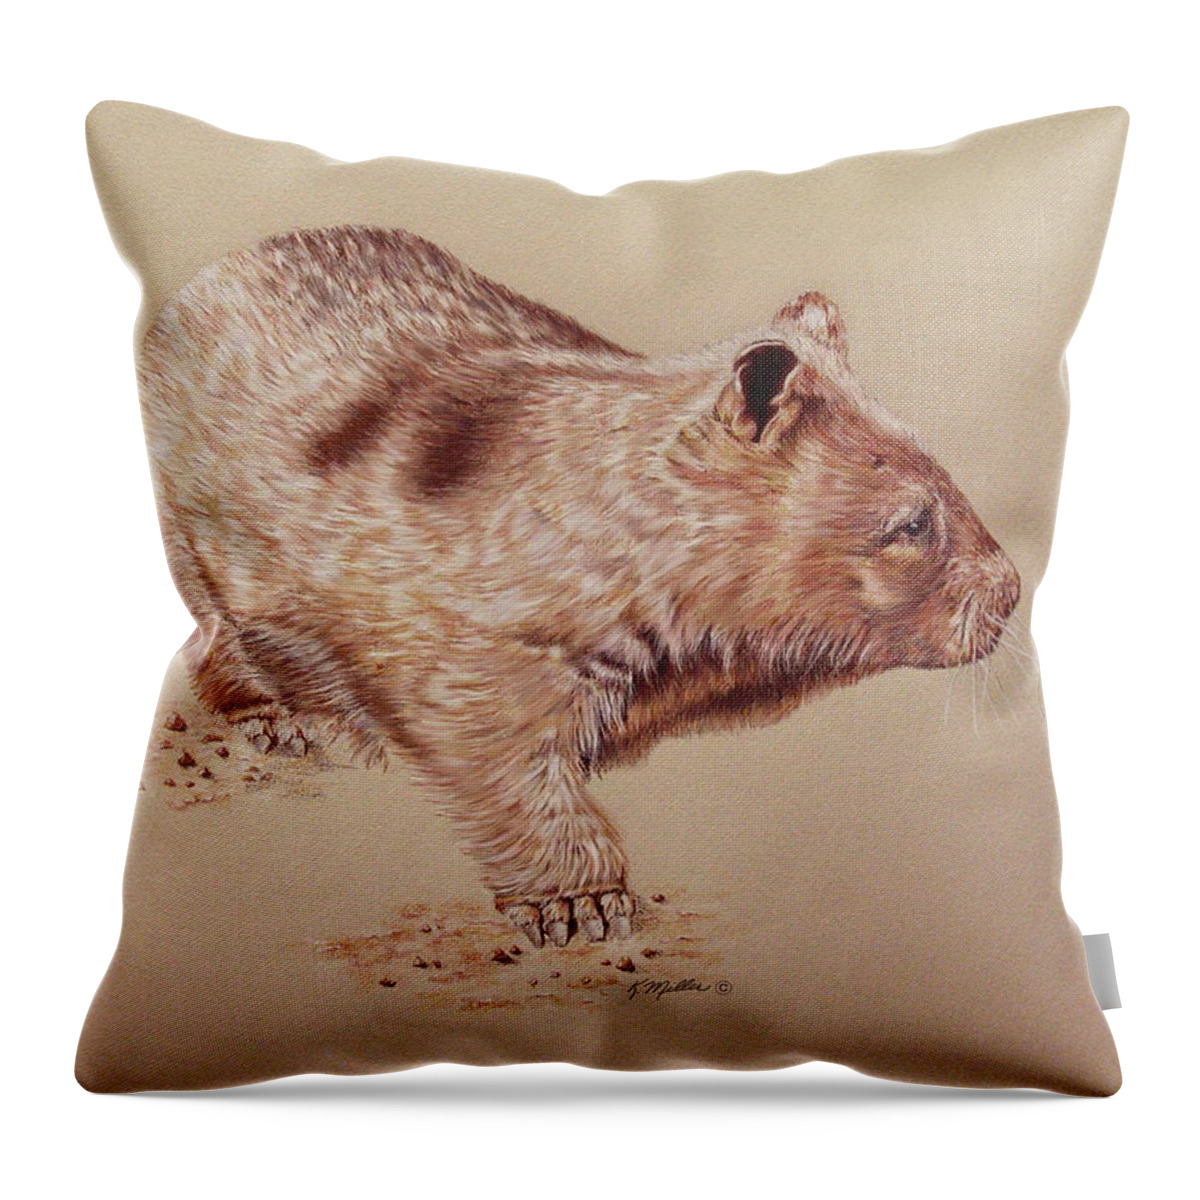 Wombat Throw Pillow featuring the drawing Wombat by Kathie Miller